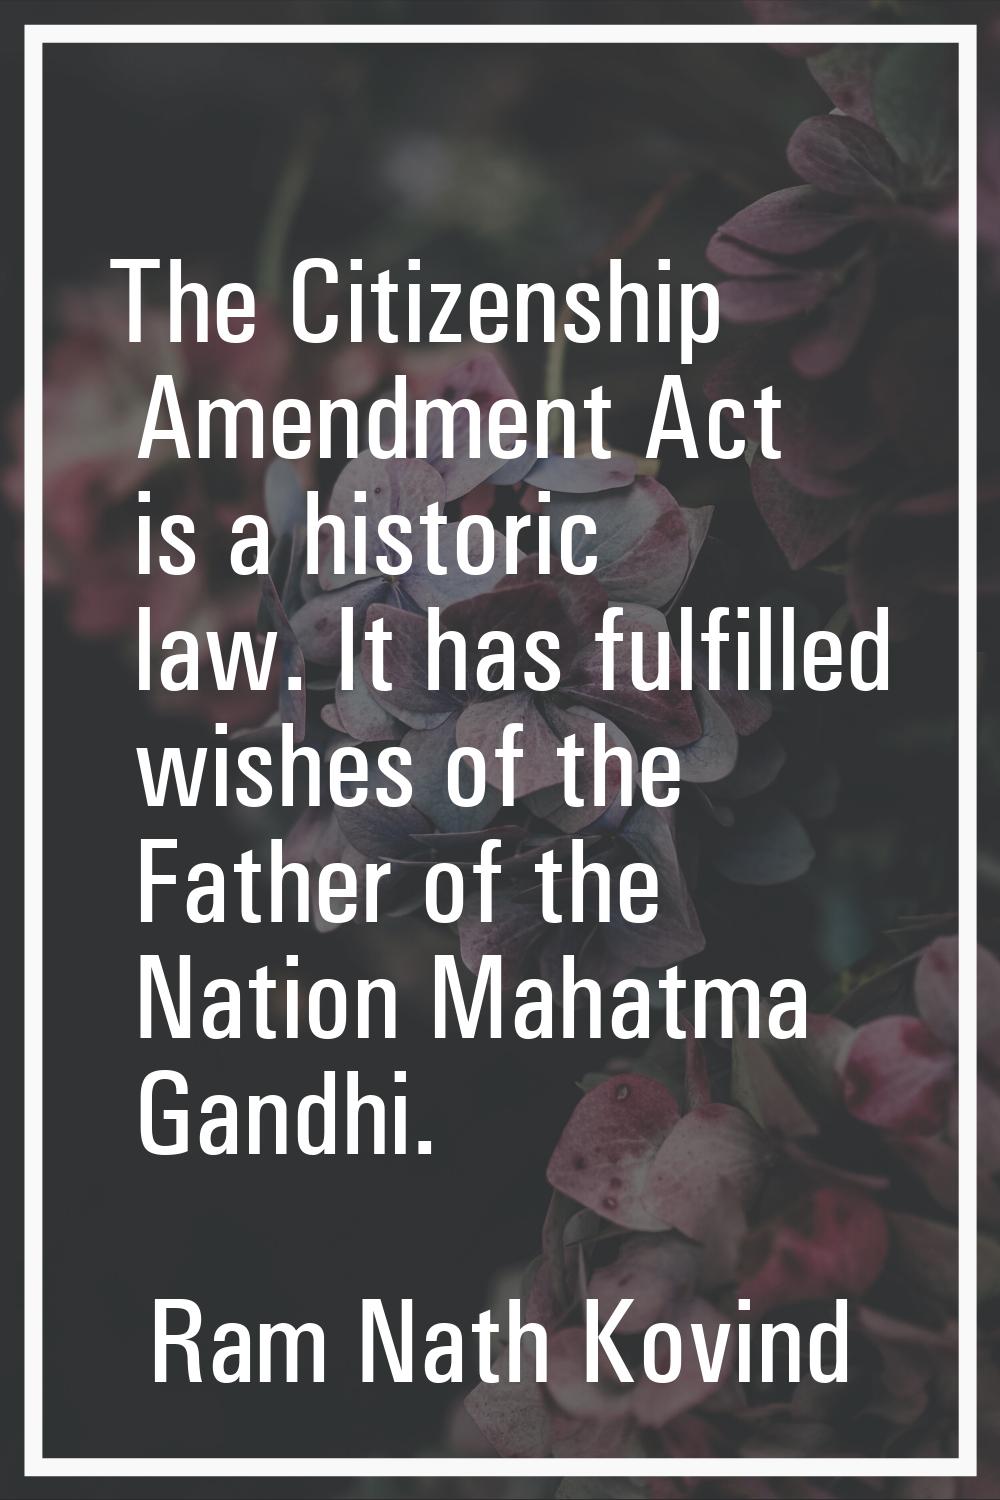 The Citizenship Amendment Act is a historic law. It has fulfilled wishes of the Father of the Natio